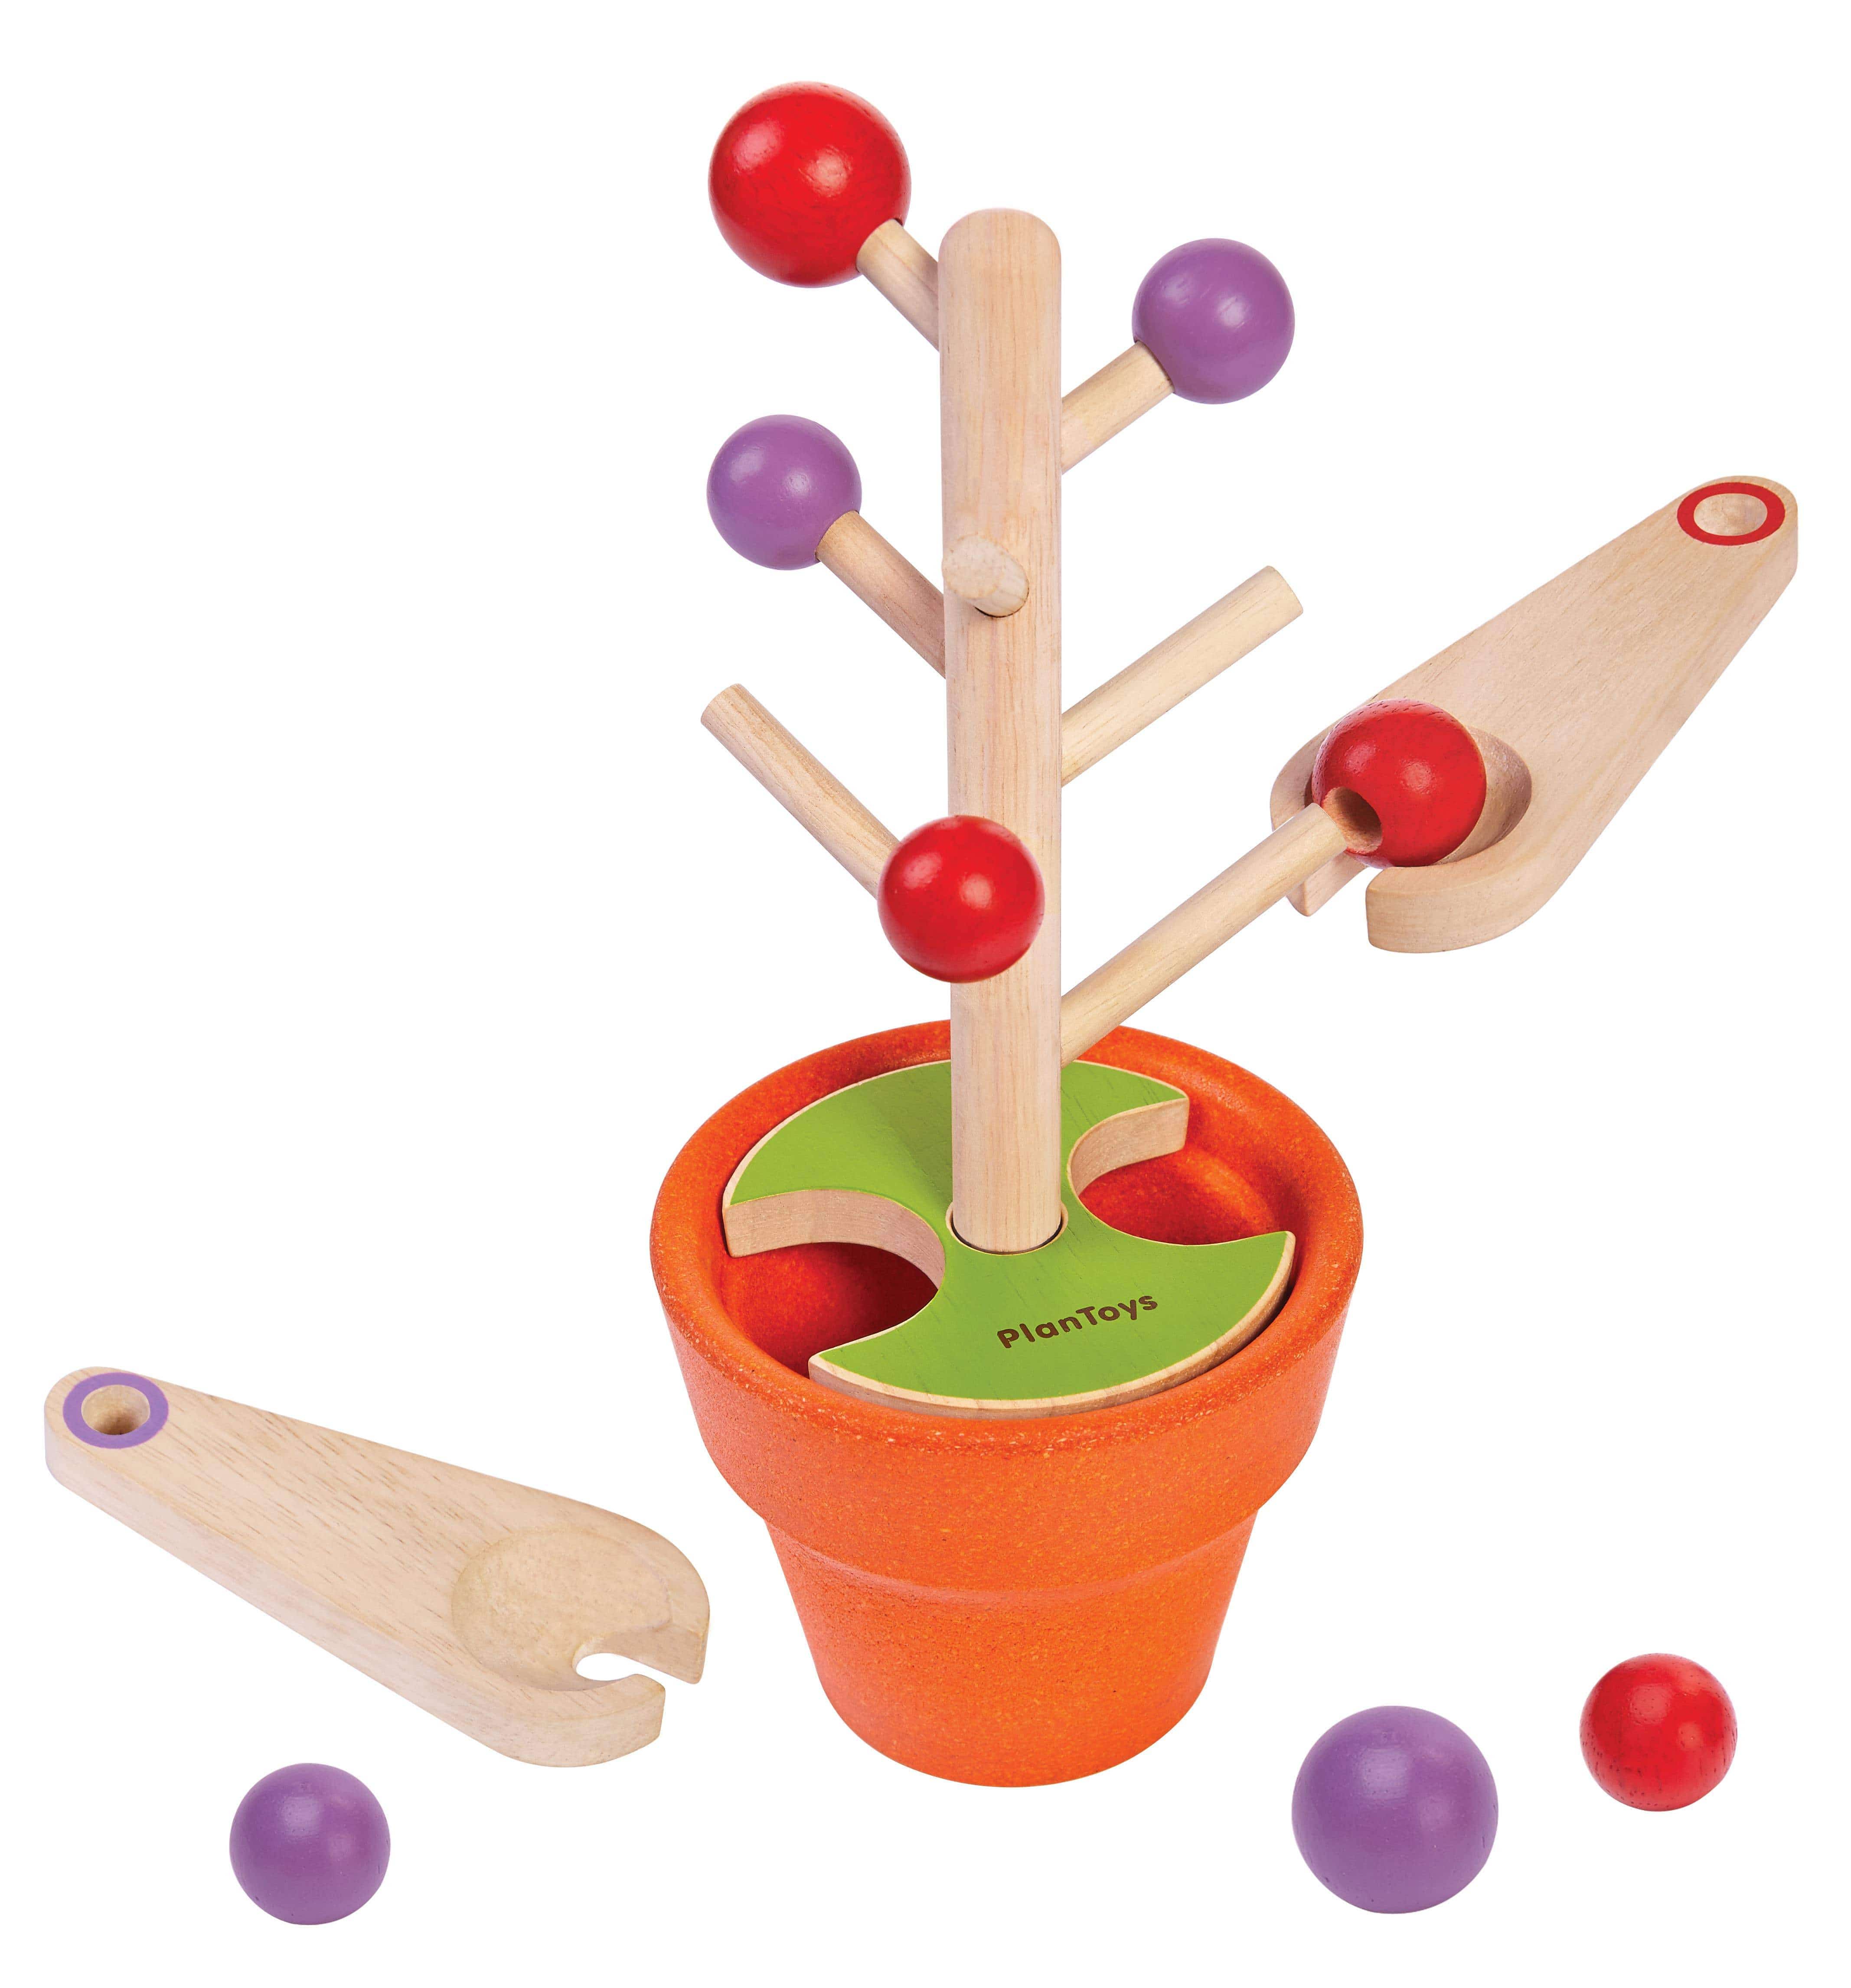 PlanToys Pick A Berry wooden game *NEW*